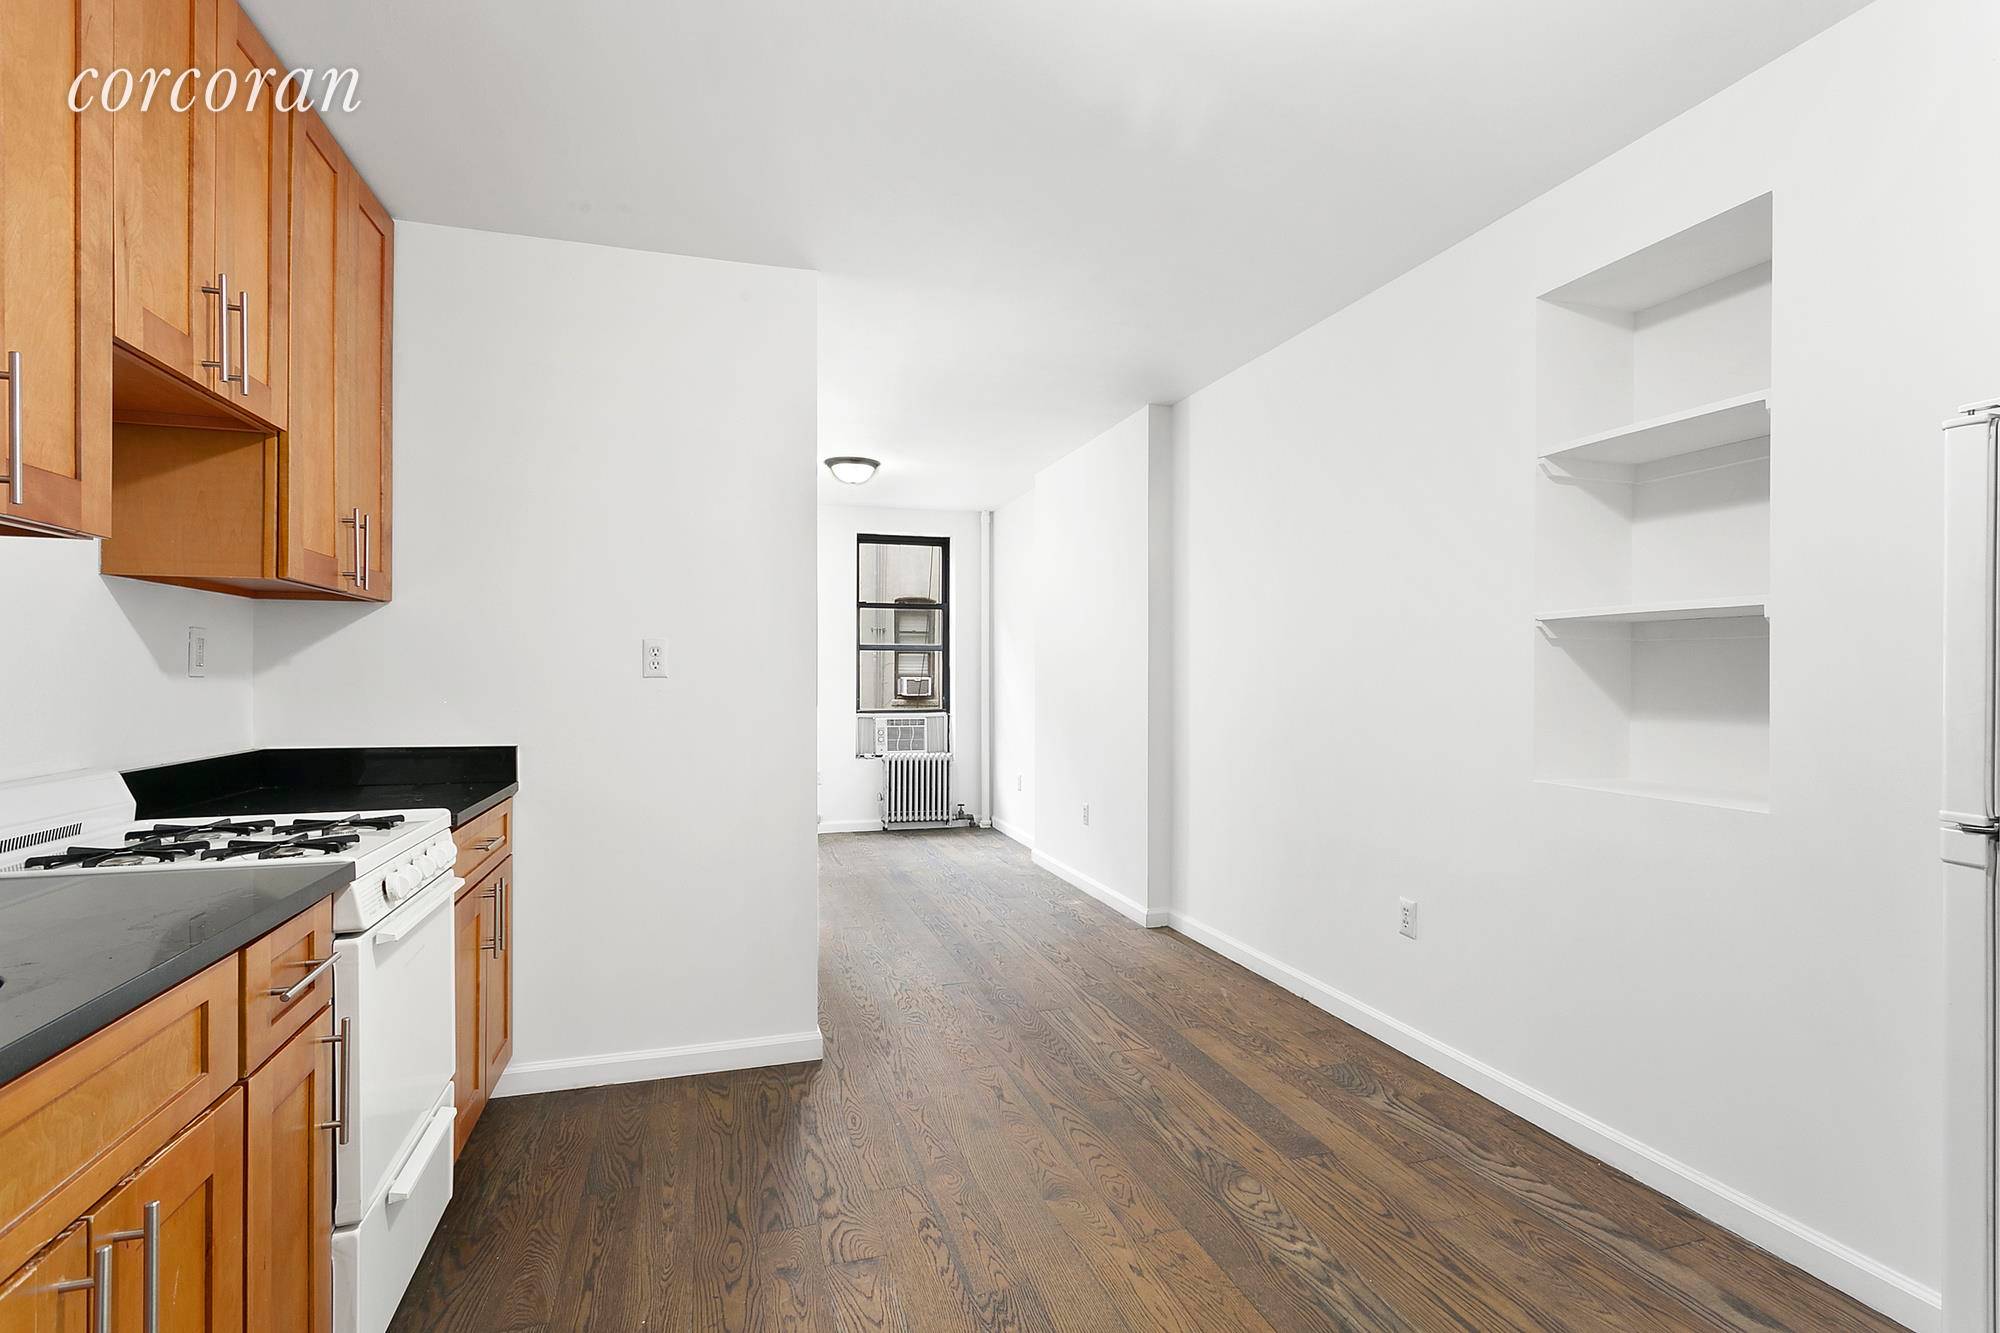 Apartment 7 at 148 Sullivan is a true one bedroom in great condition, on a historic block of the Sullivan Thompson Historic District, where Soho meets the Village.